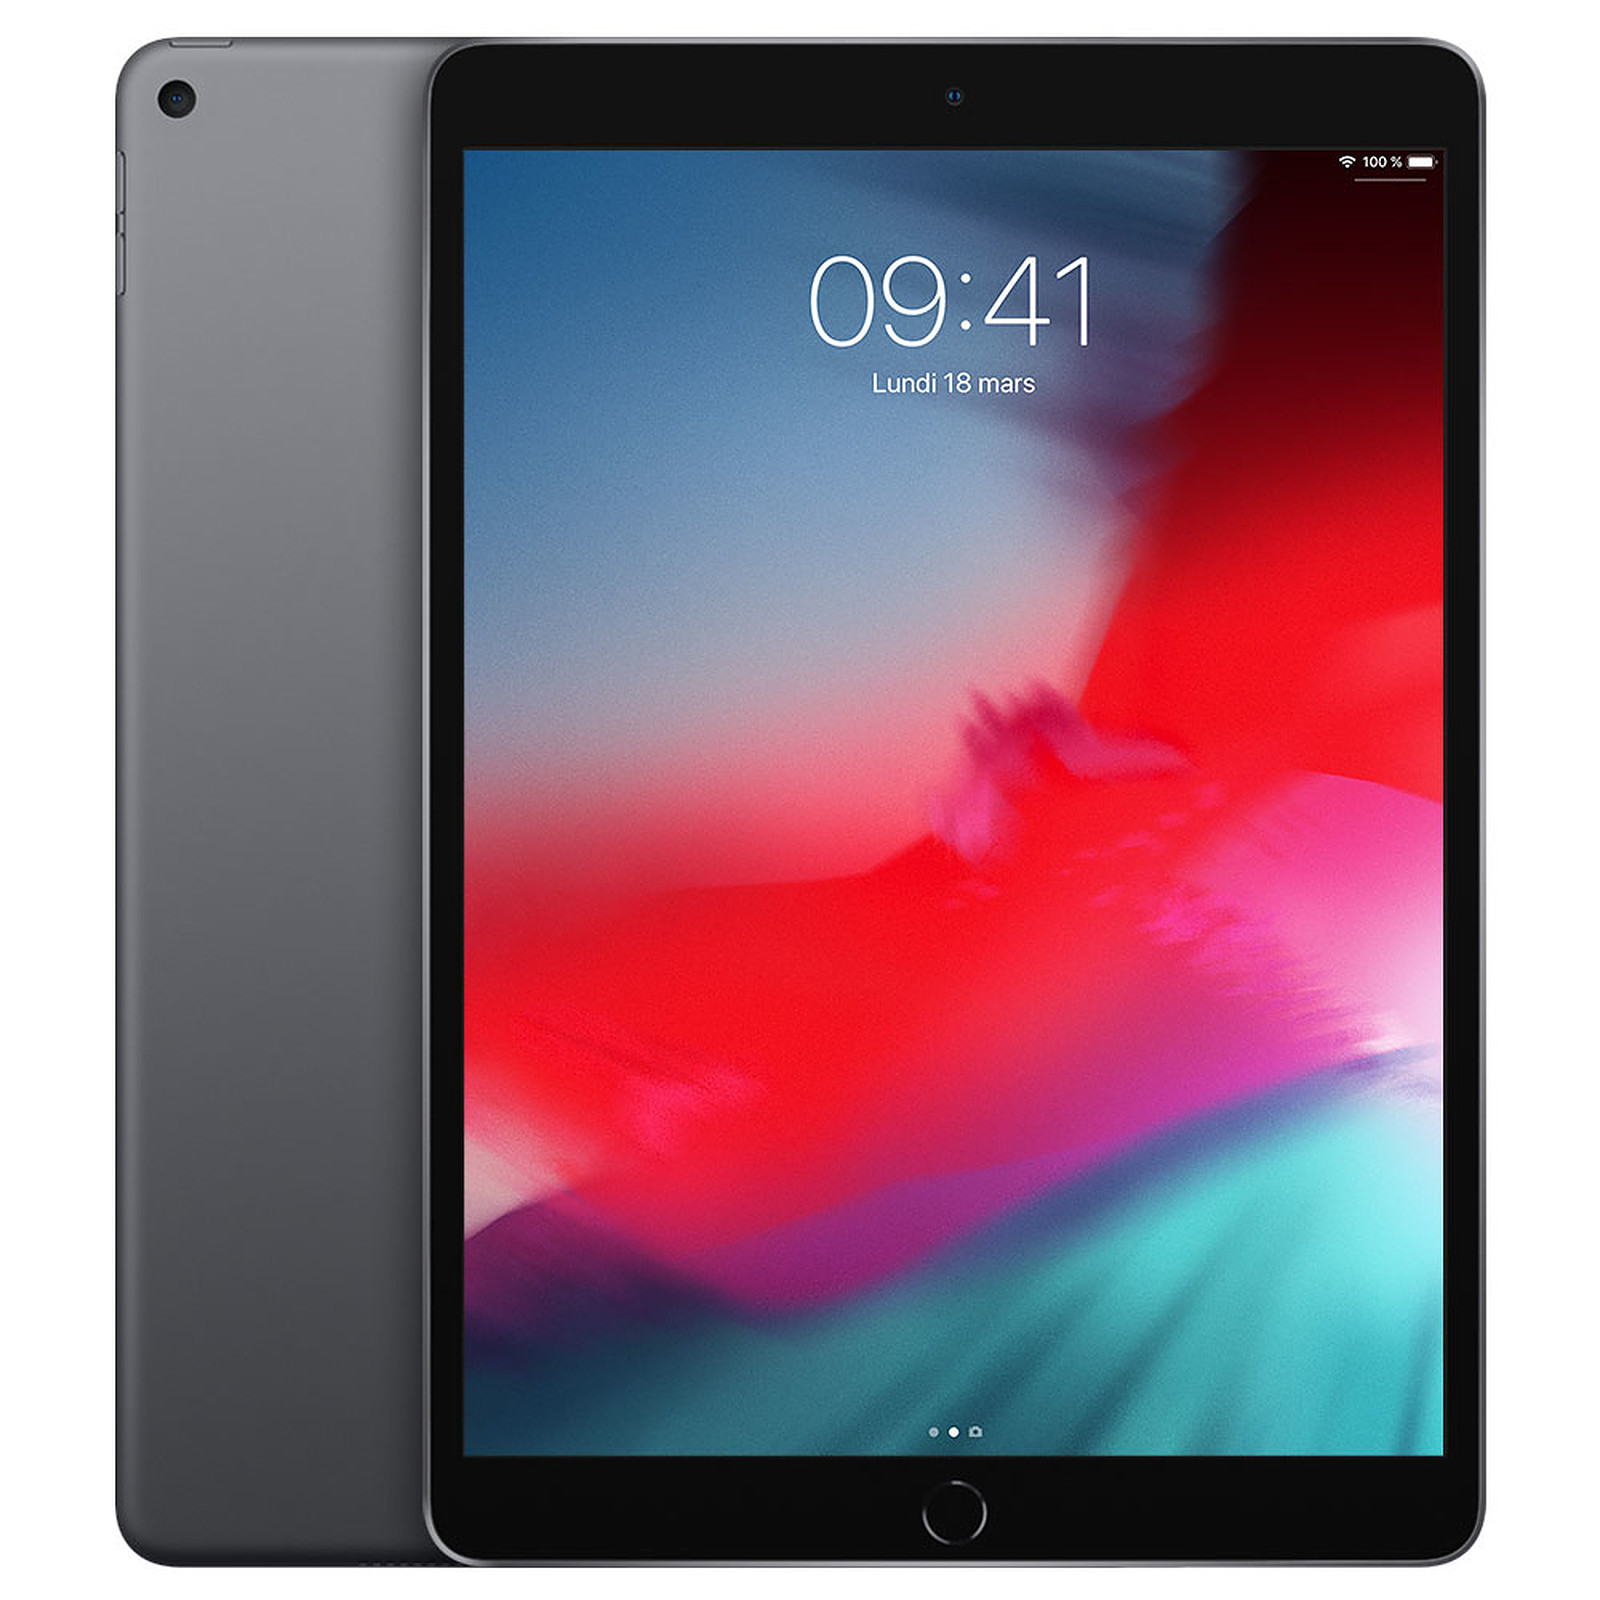 Apple iPad Air (2019) Wi-Fi 64 Go Gris Sideral · Reconditionne - Tablette tactile Apple